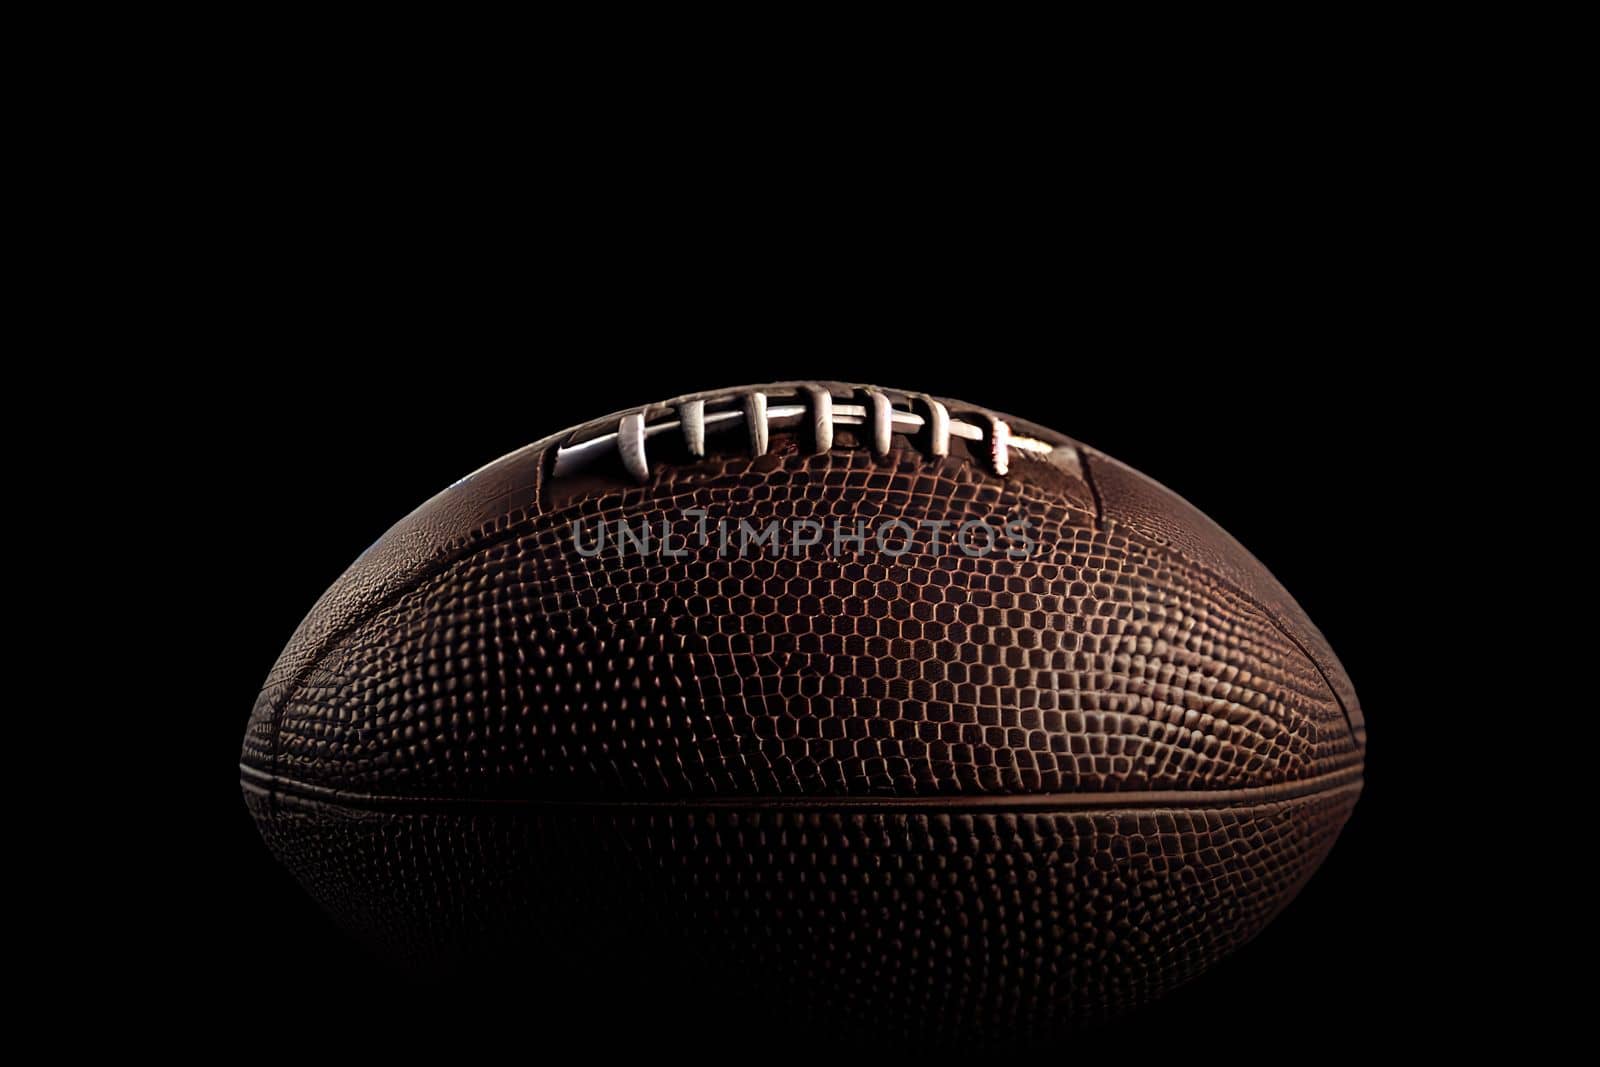 Close up of an American football on dark background. Super bowl. Wallpaper